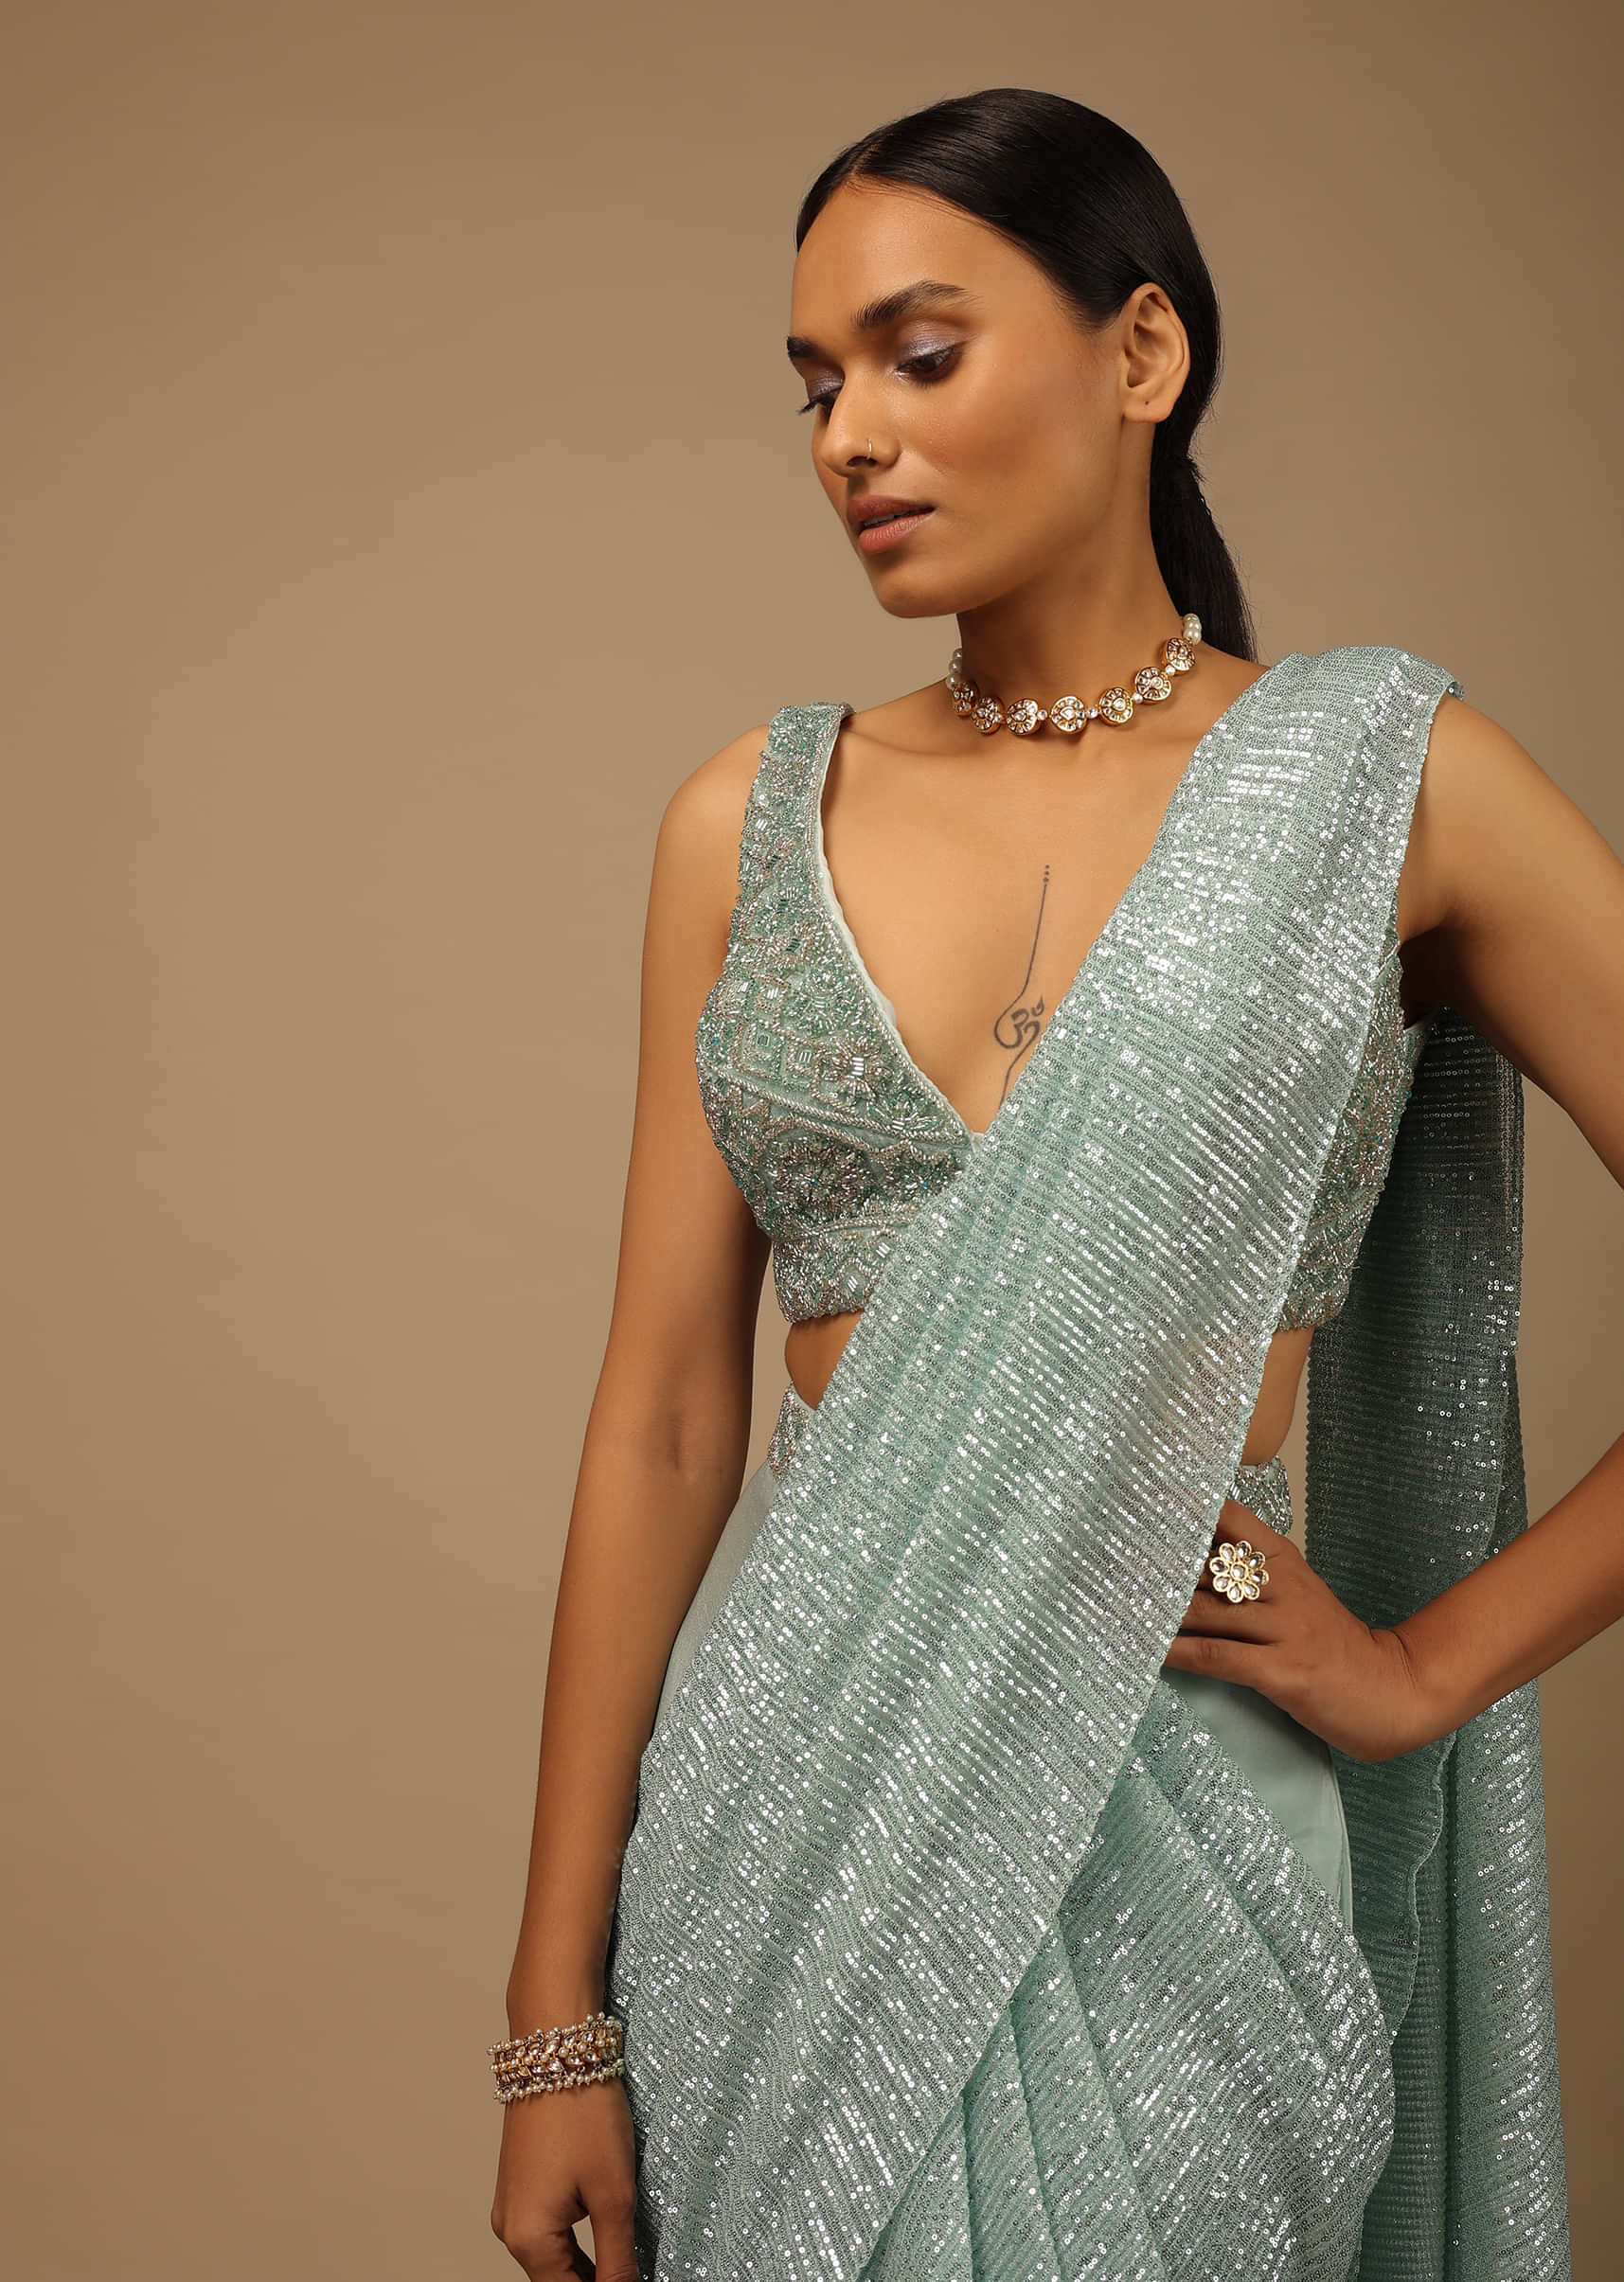 Sky Blue Ready Pleated Saree With Ruffles On The Hem, Sequins Pallu And Cut Dana Embroidered Blouse